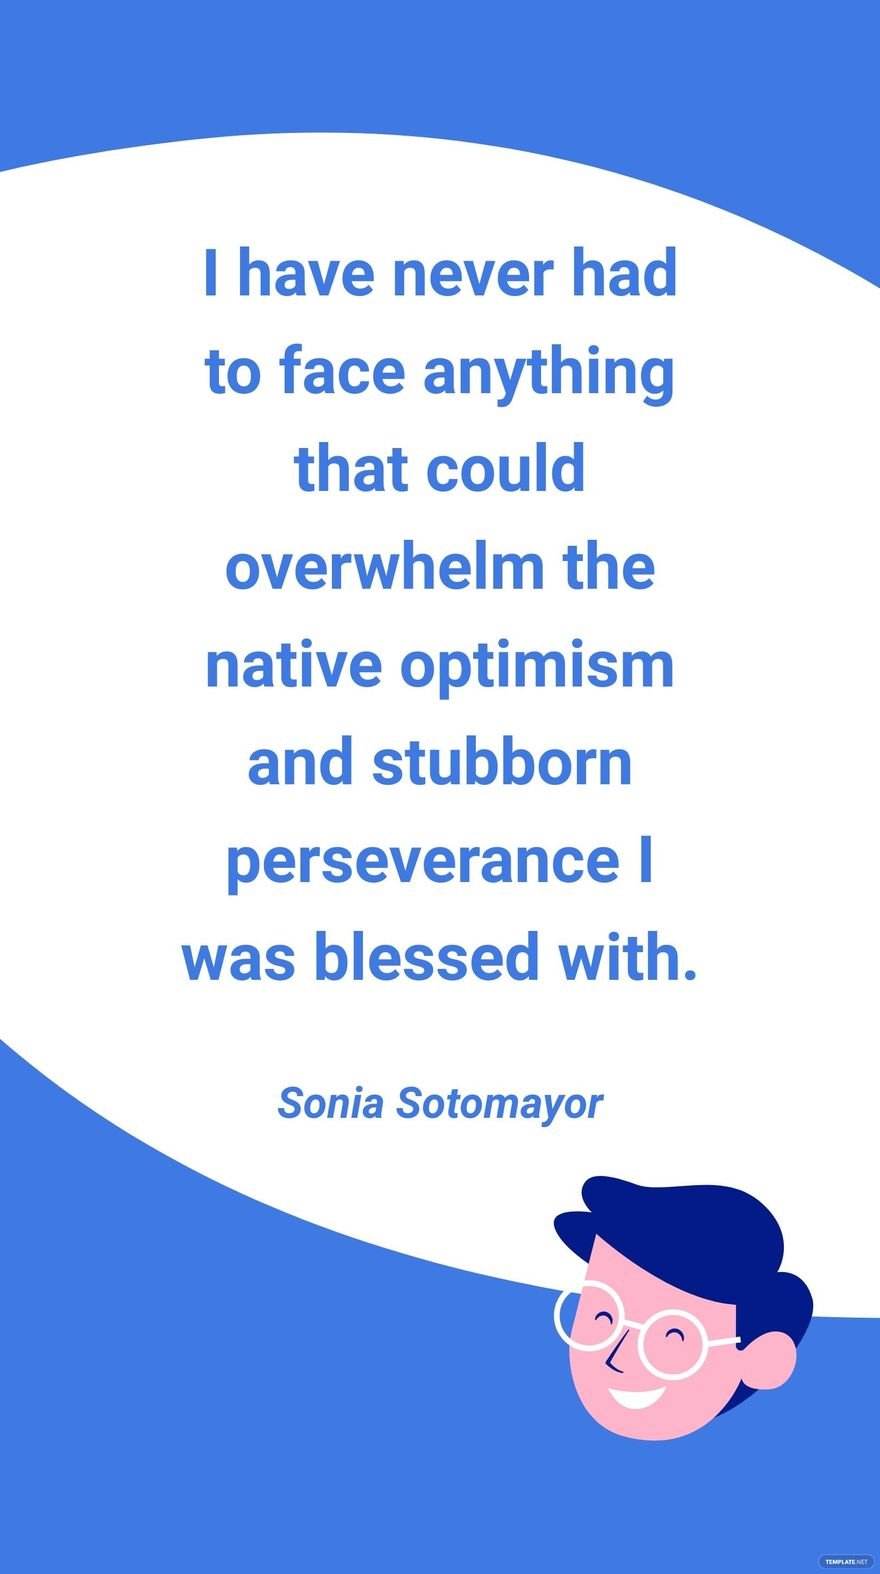 Free Sonia Sotomayor - I have never had to face anything that could overwhelm the native optimism and stubborn perseverance I was blessed with. in JPG